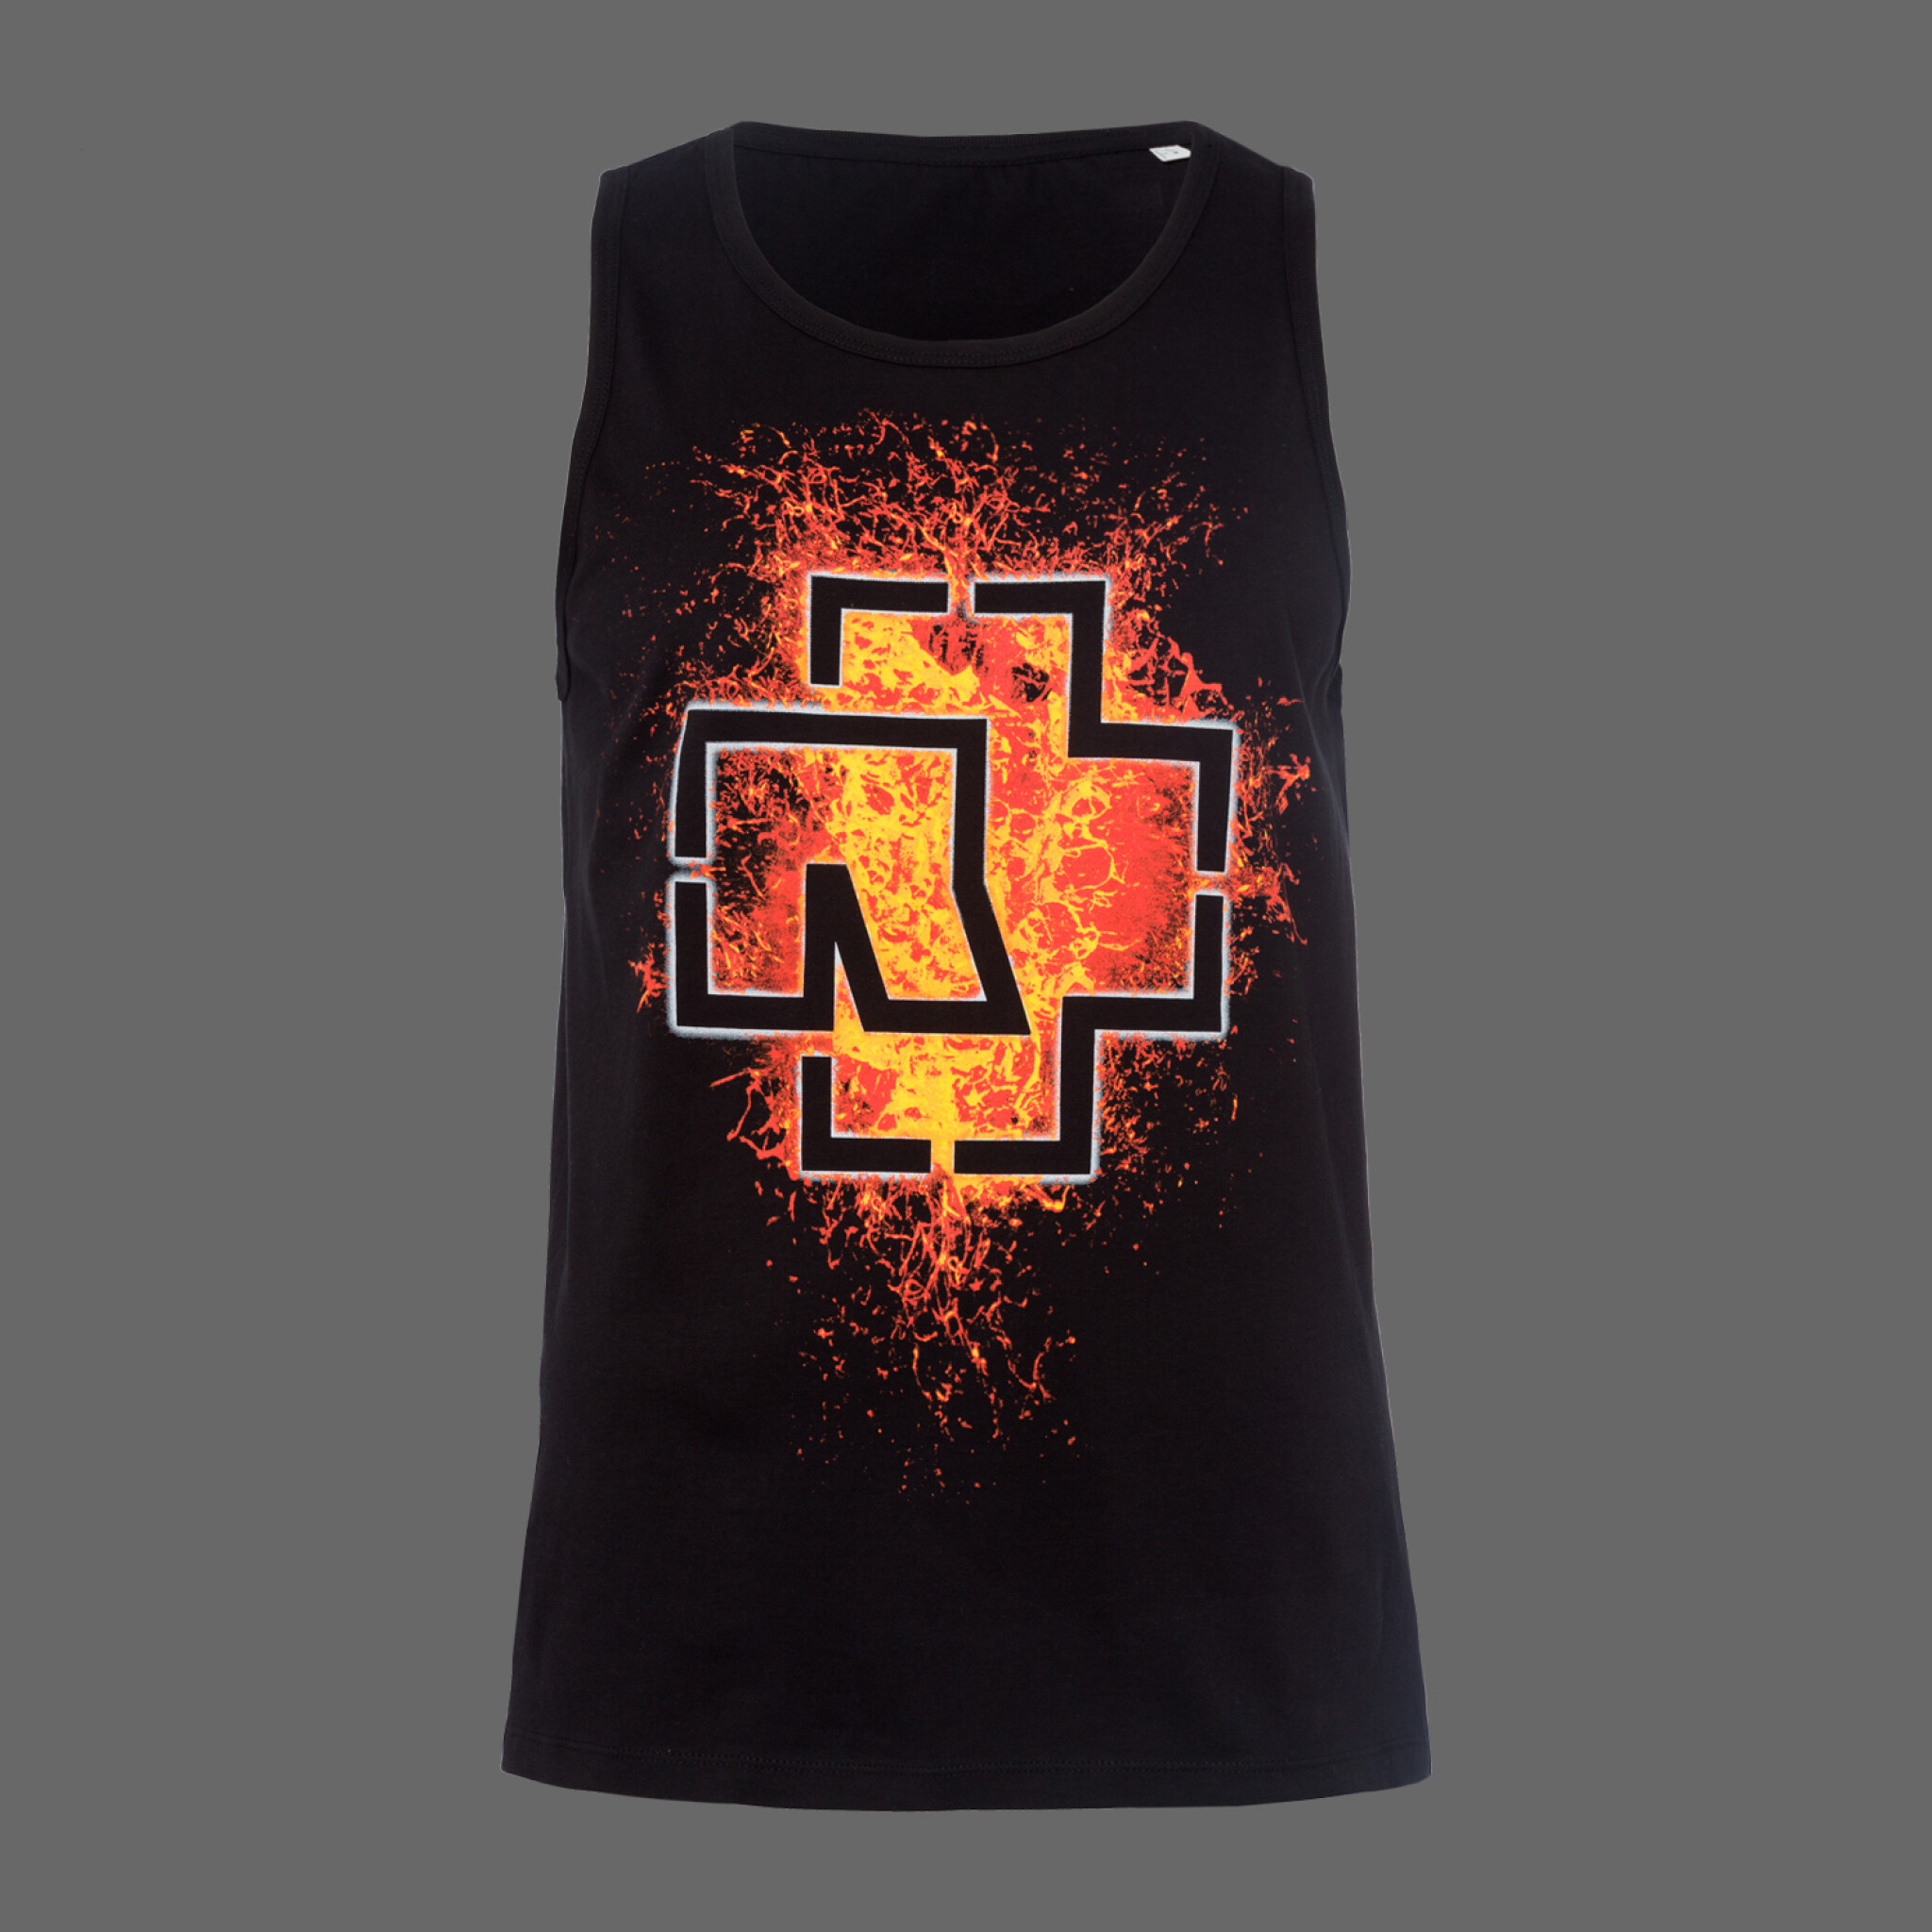 Coin laundry defense poultry Tank top ”Lava Logo” | Rammstein-Shop